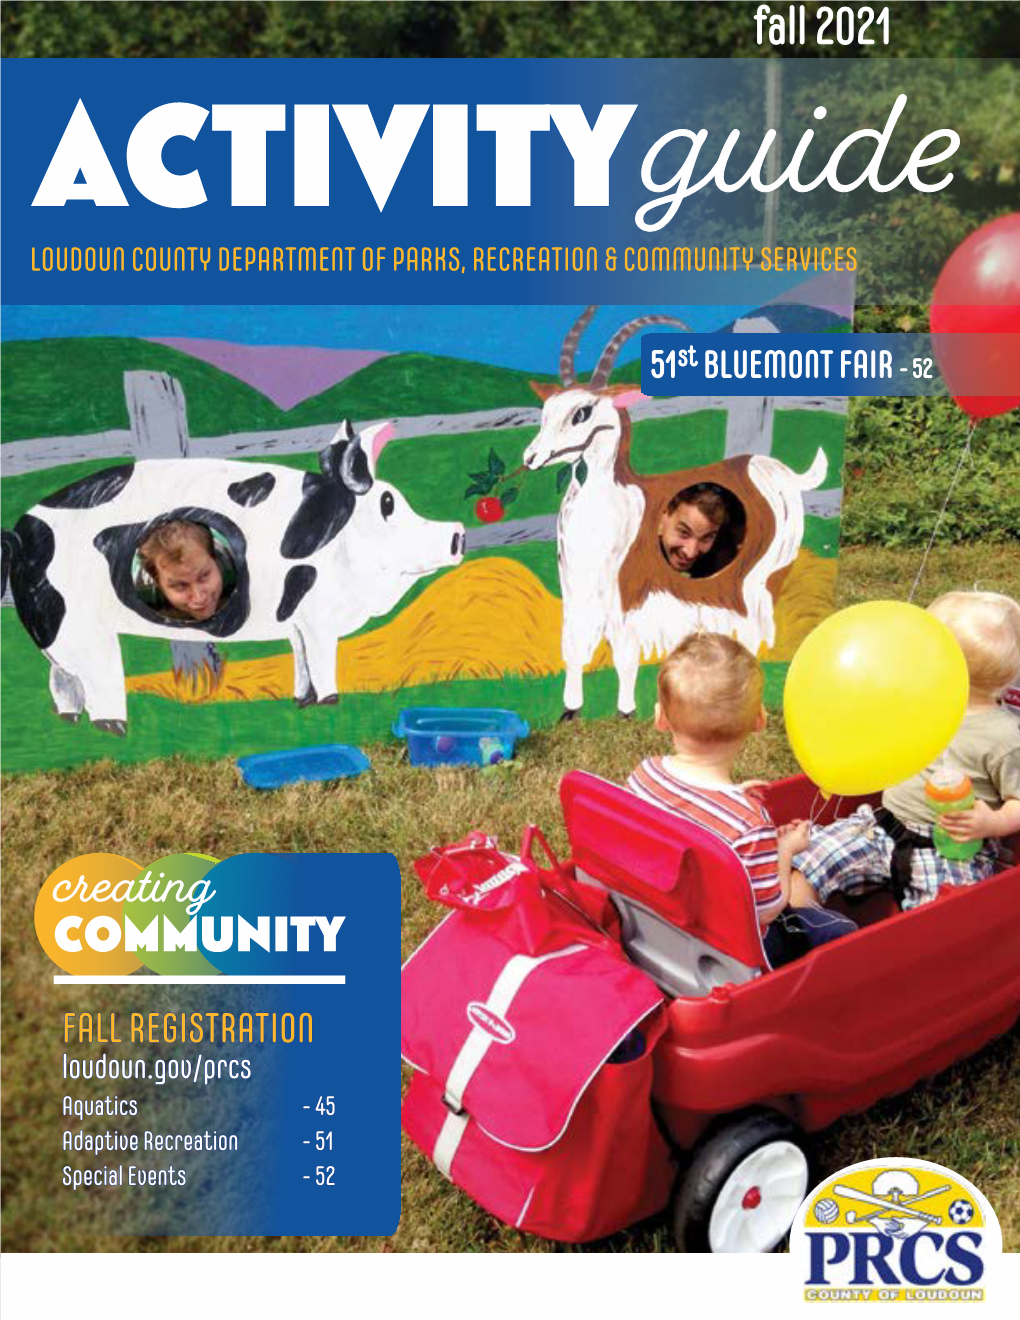 Fall Activity Guide Are Available at PRCS Centers and Parks, Our Goal Is to Ensure Quality Programs